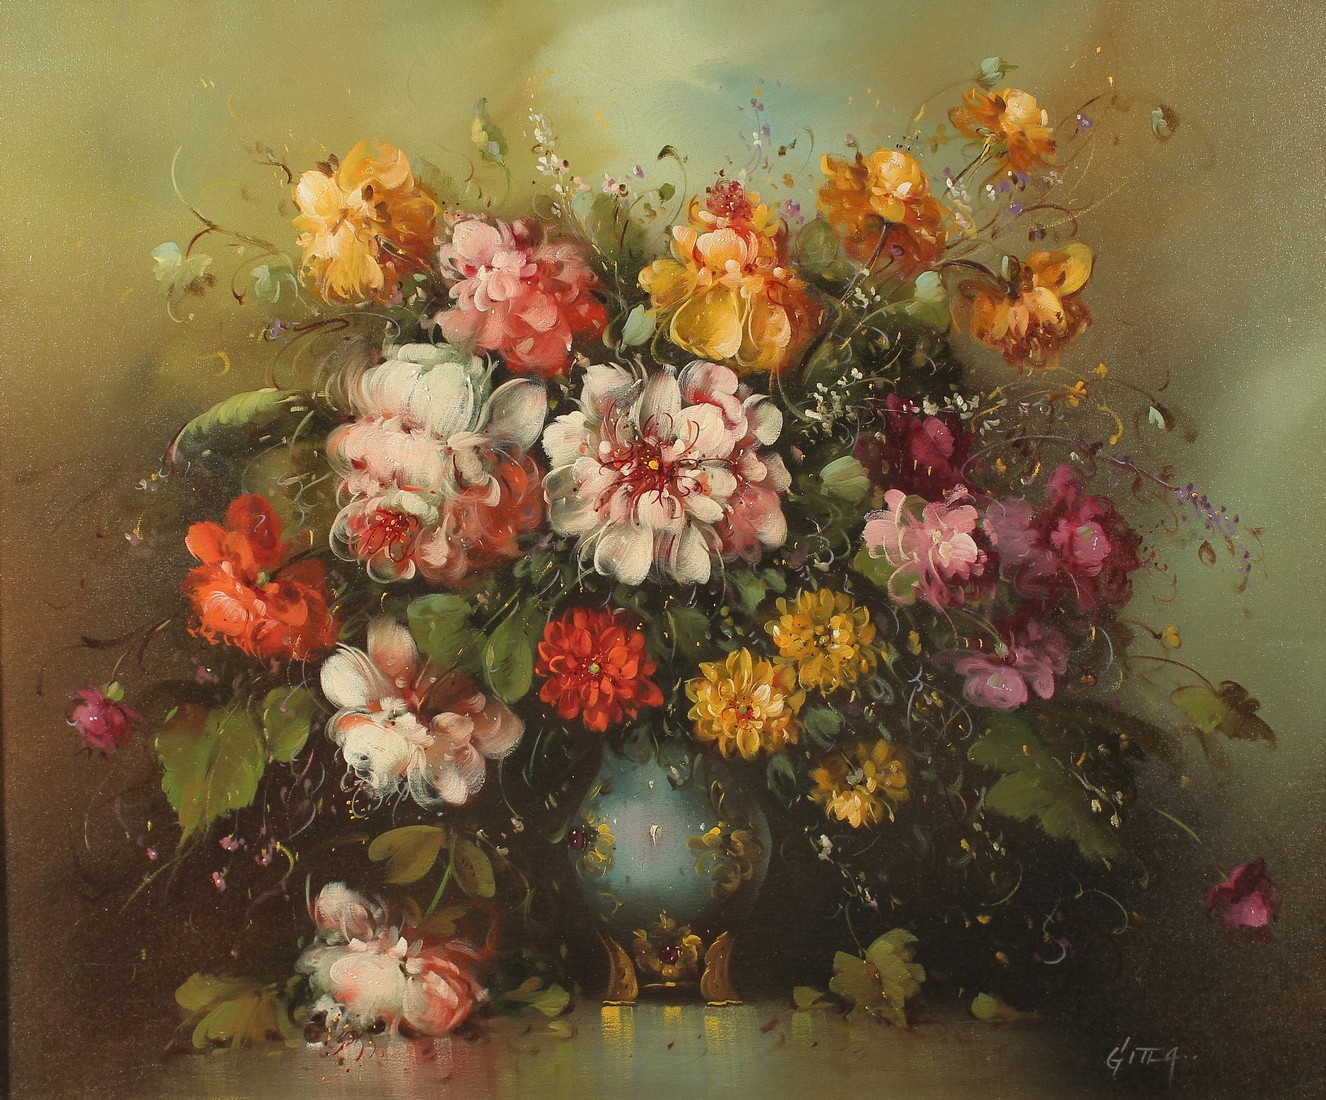 G. Itla (20th Century), A still life of mixed flowers in a vase, oil on canvas, signed, 20" x - Image 2 of 4